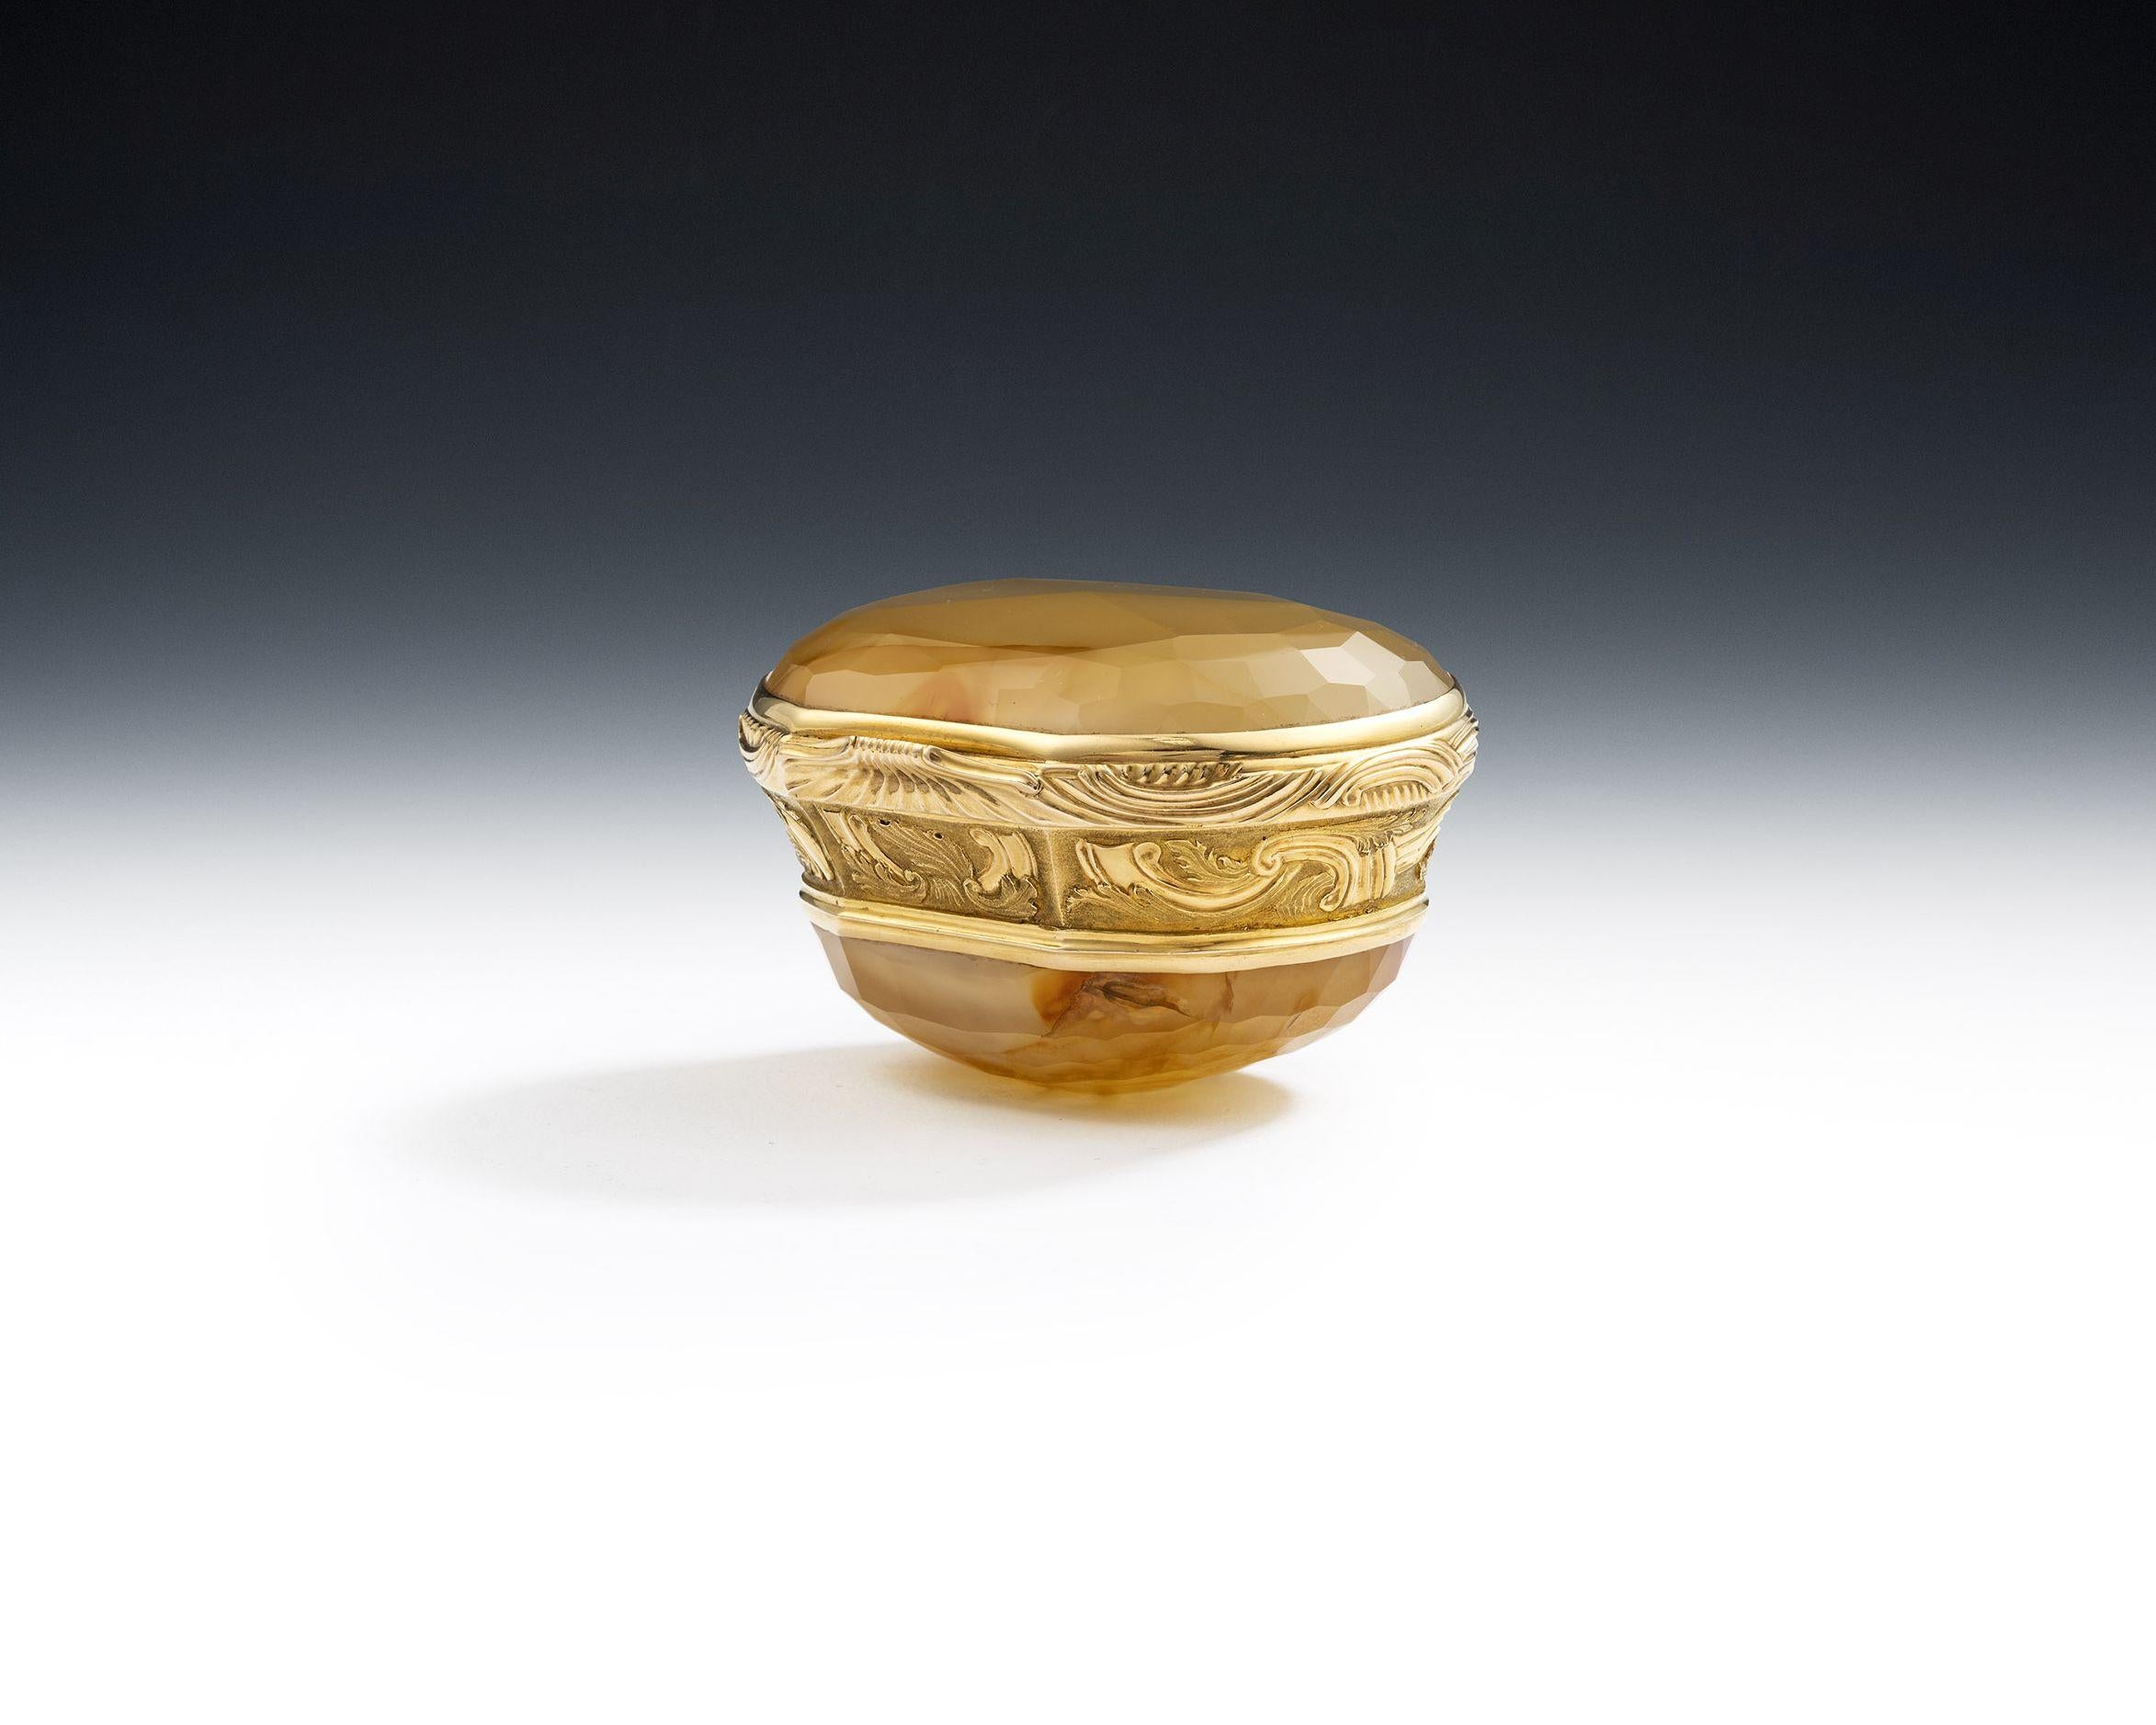 An Important George II Gold Mounted Hardstone Snuff Box. English Circa 1740/50.

The Snuff Box is one of the most important we have offered over the years and has a tall form. It is inset, on the cover and base, with beautifully shaded and